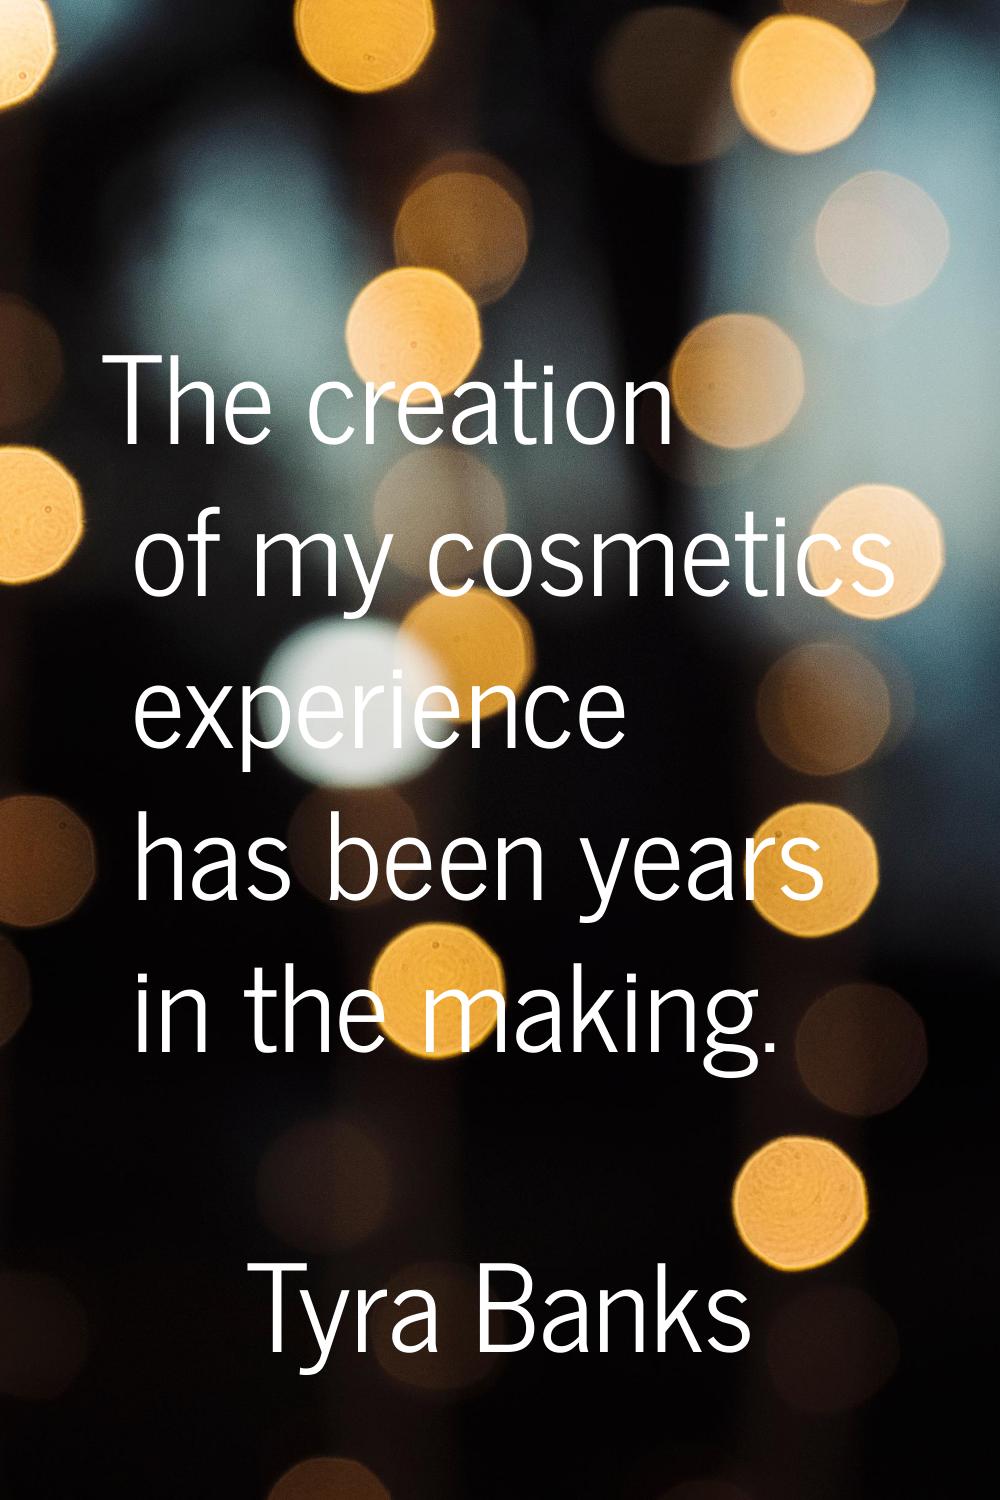 The creation of my cosmetics experience has been years in the making.